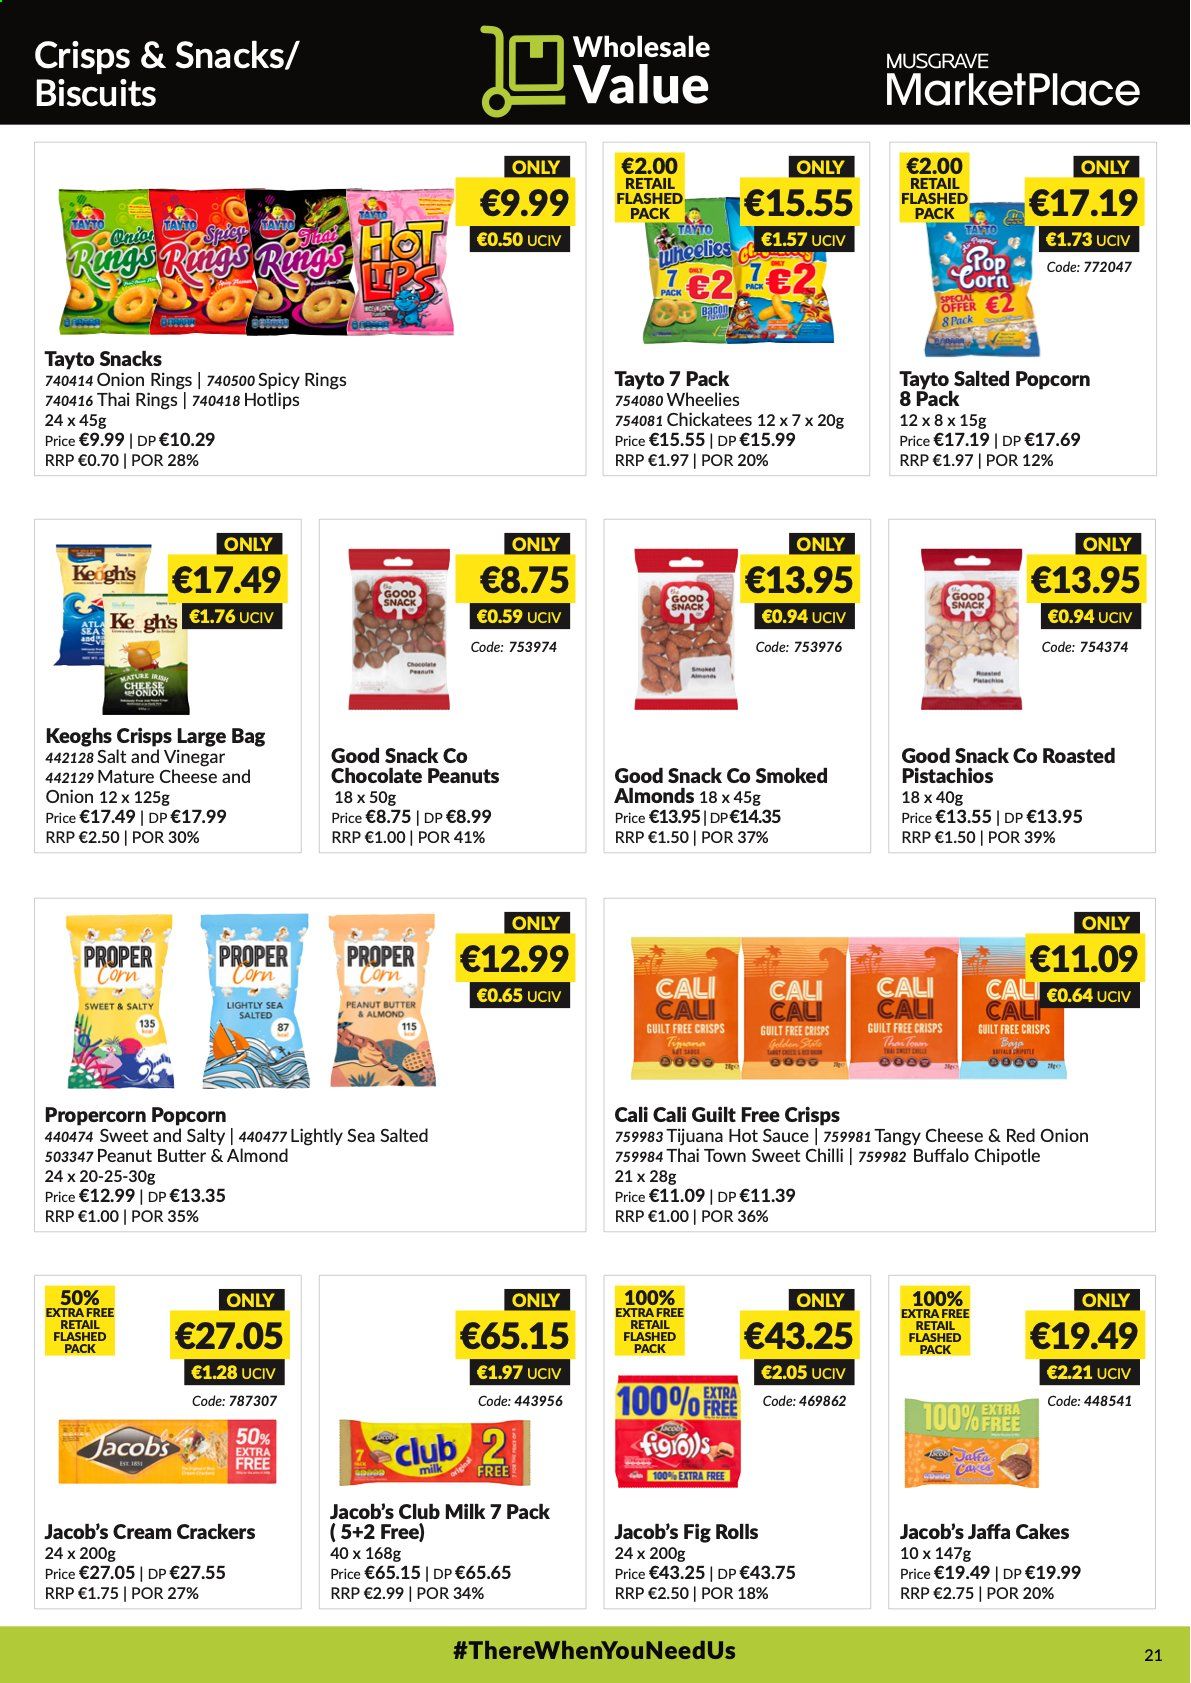 thumbnail - MUSGRAVE Market Place offer  - 17.01.2021 - 13.02.2021 - Sales products - cake, corn, onion rings, sauce, chocolate, crackers, biscuit, club milk, snack, Tayto, popcorn, salt, hot sauce, vinegar, peanut butter, almonds, pistachios, Jacobs. Page 21.